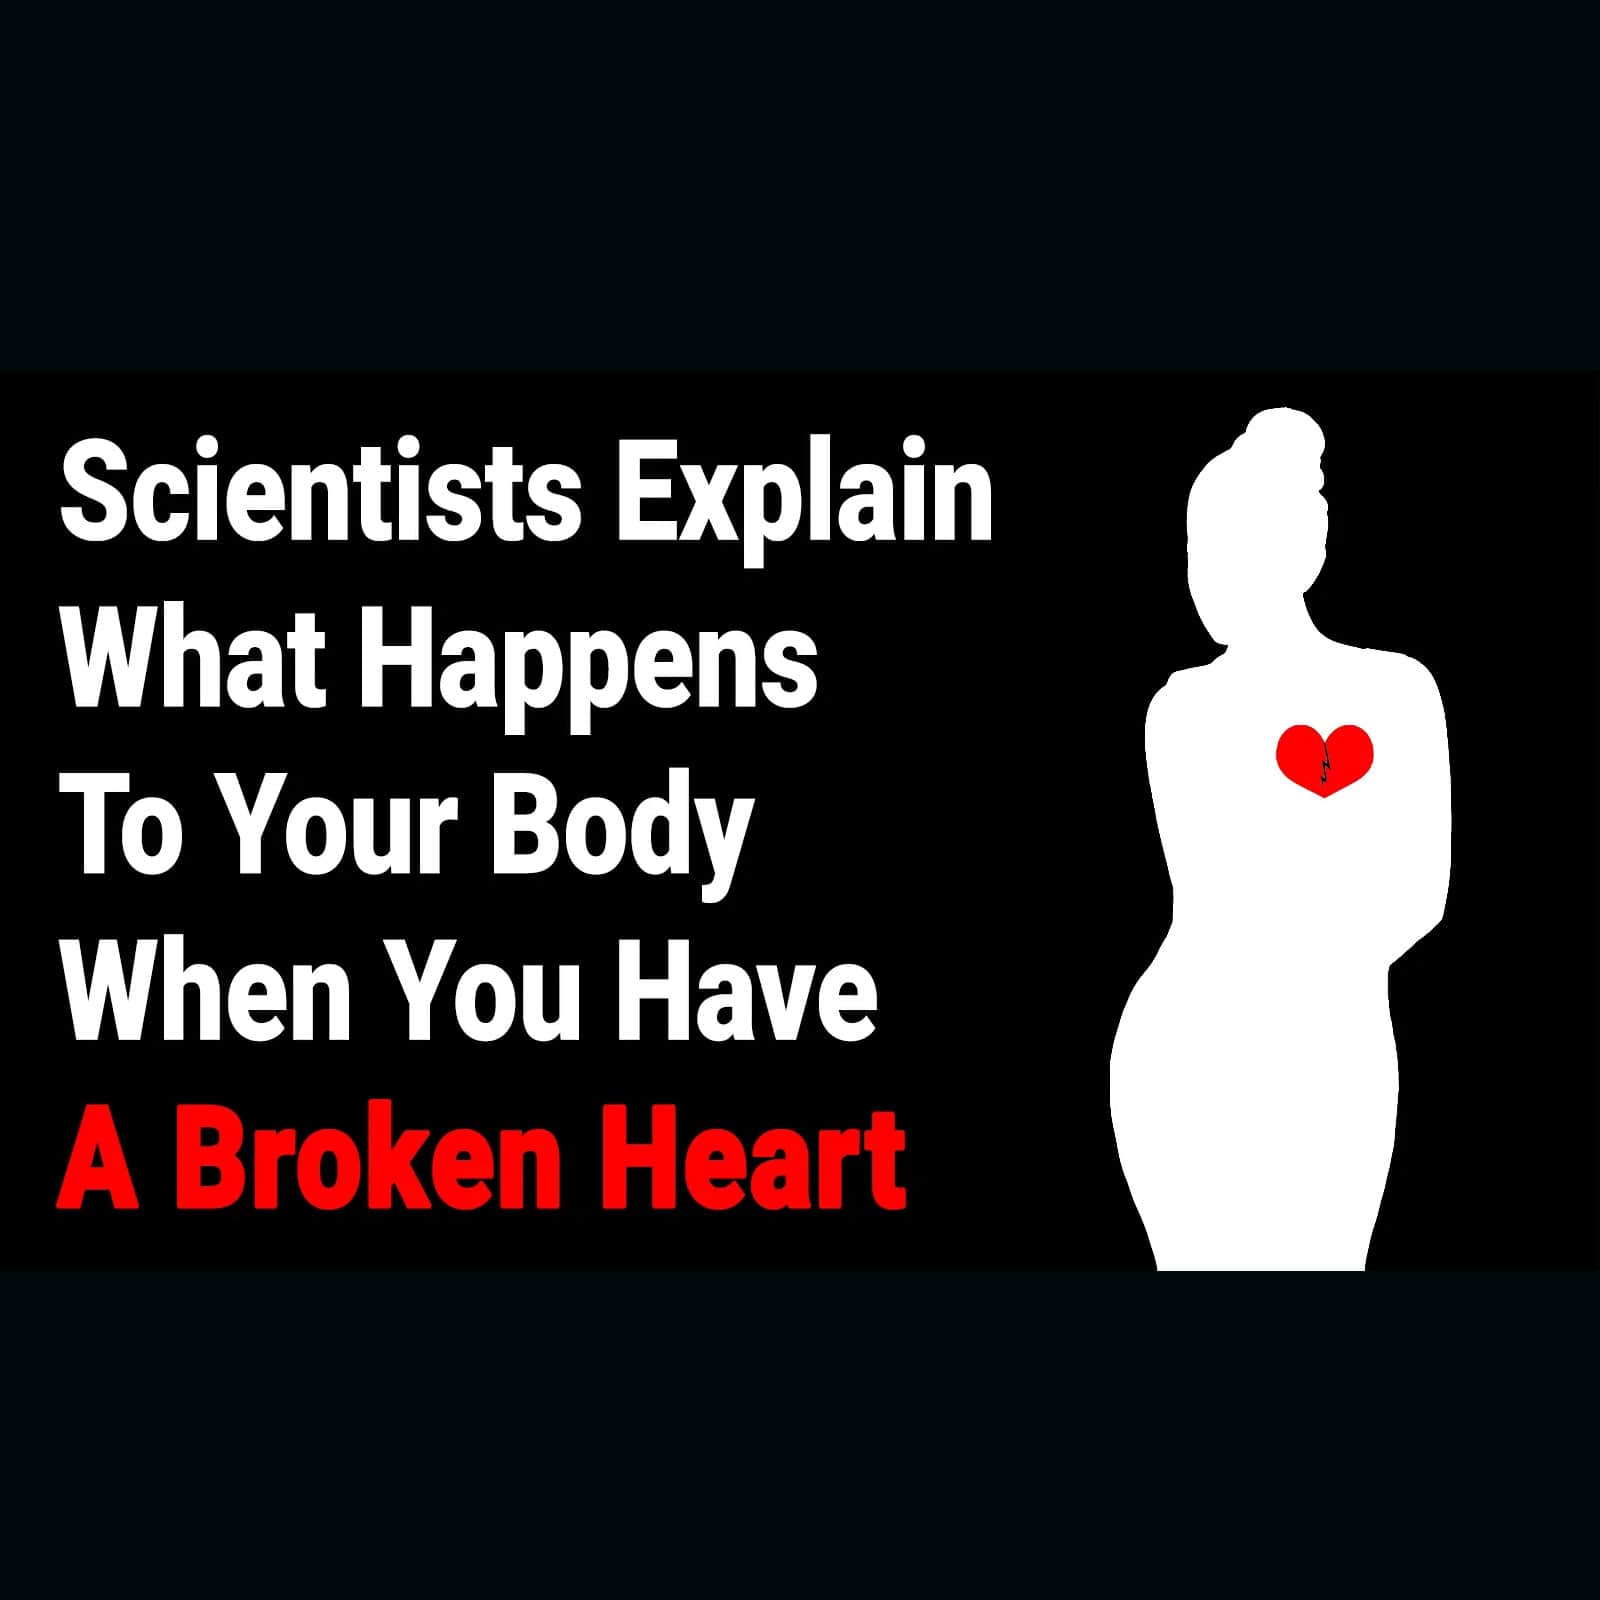 Scientists Explain What Happens To Your Body When You Have A Broken Heart